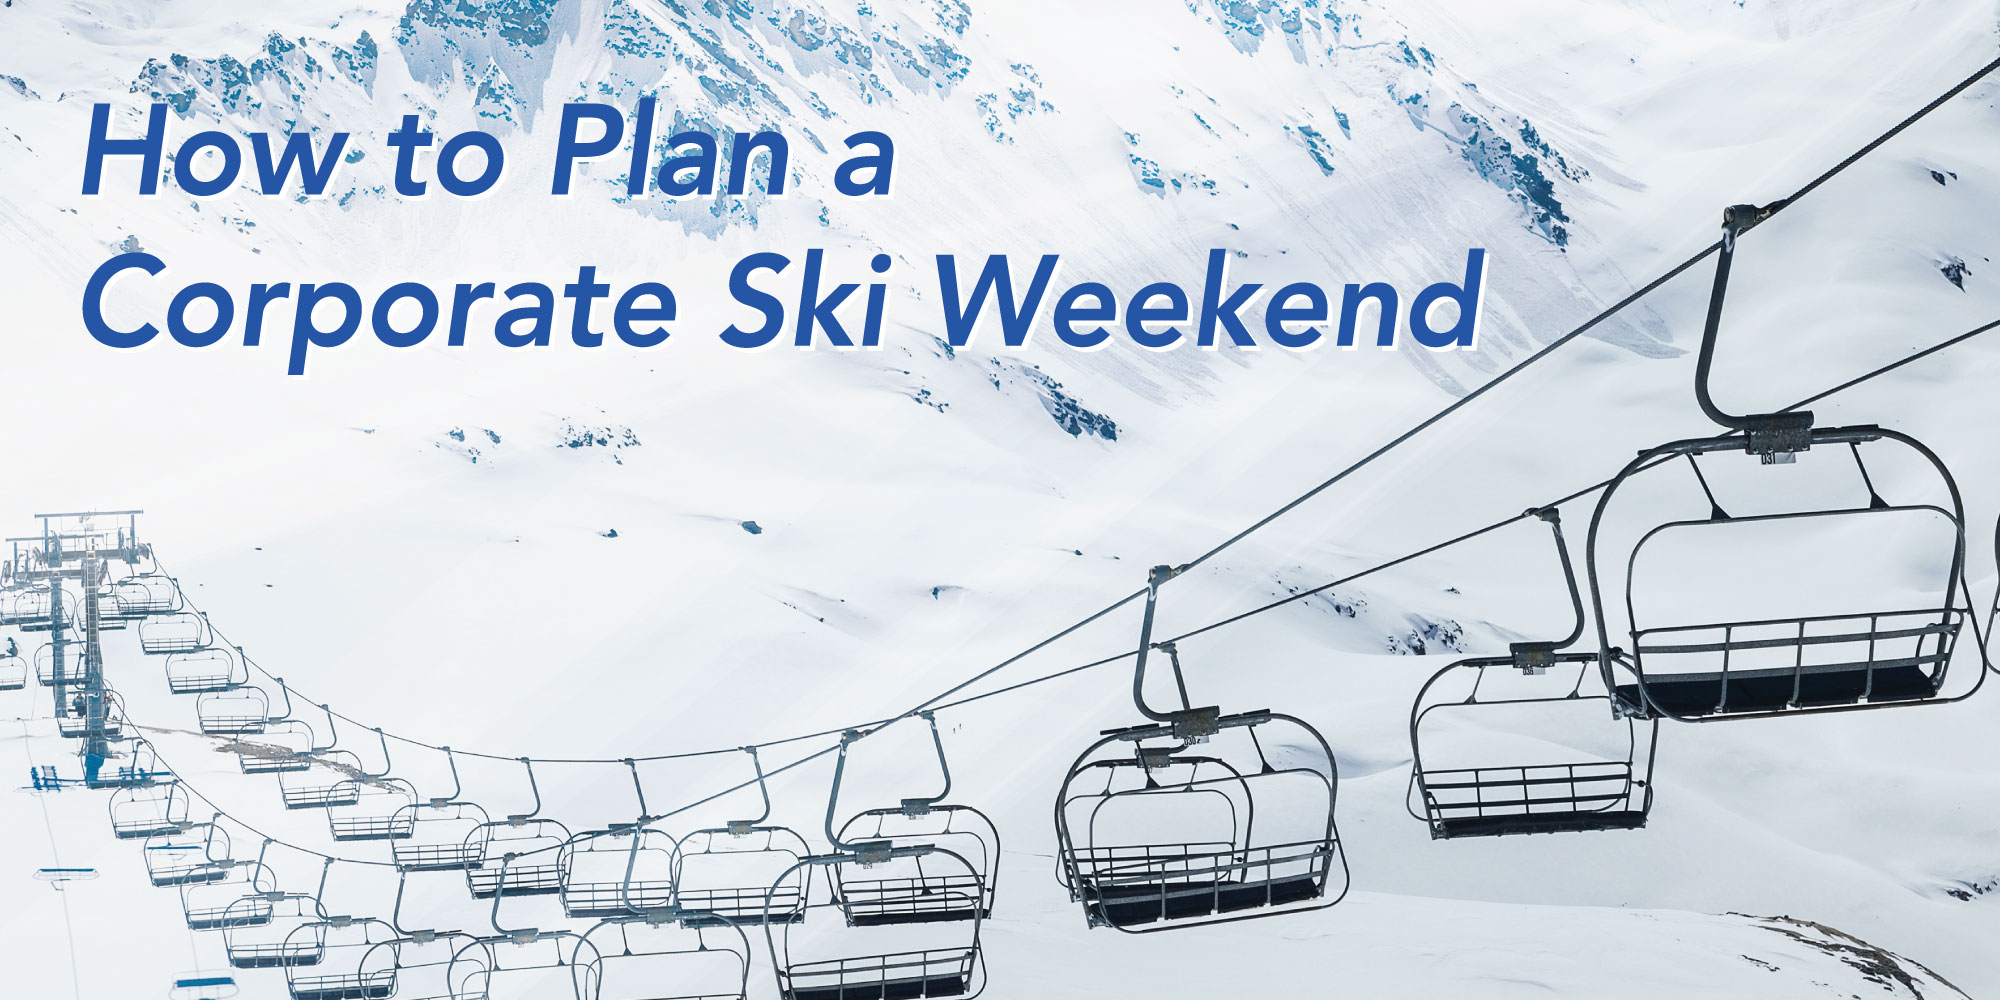 Cable cars in the snow with text: how to plan a corporate ski weekend